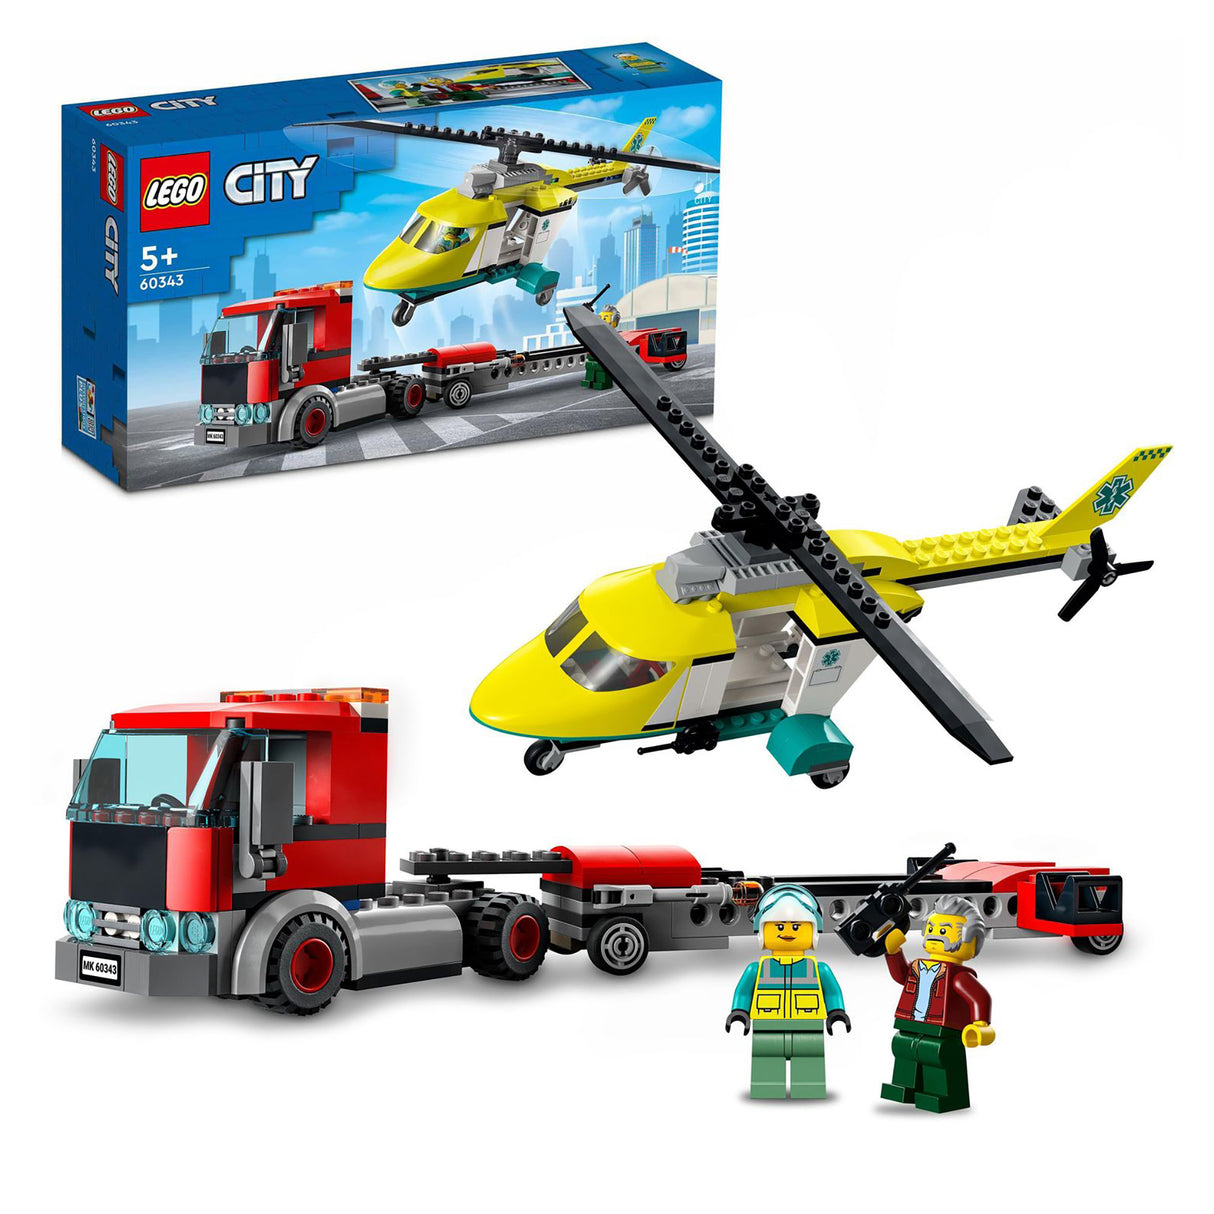 LEGO 60343 City Rescue Helicopter Transport Toy Building Kit Collectable Set